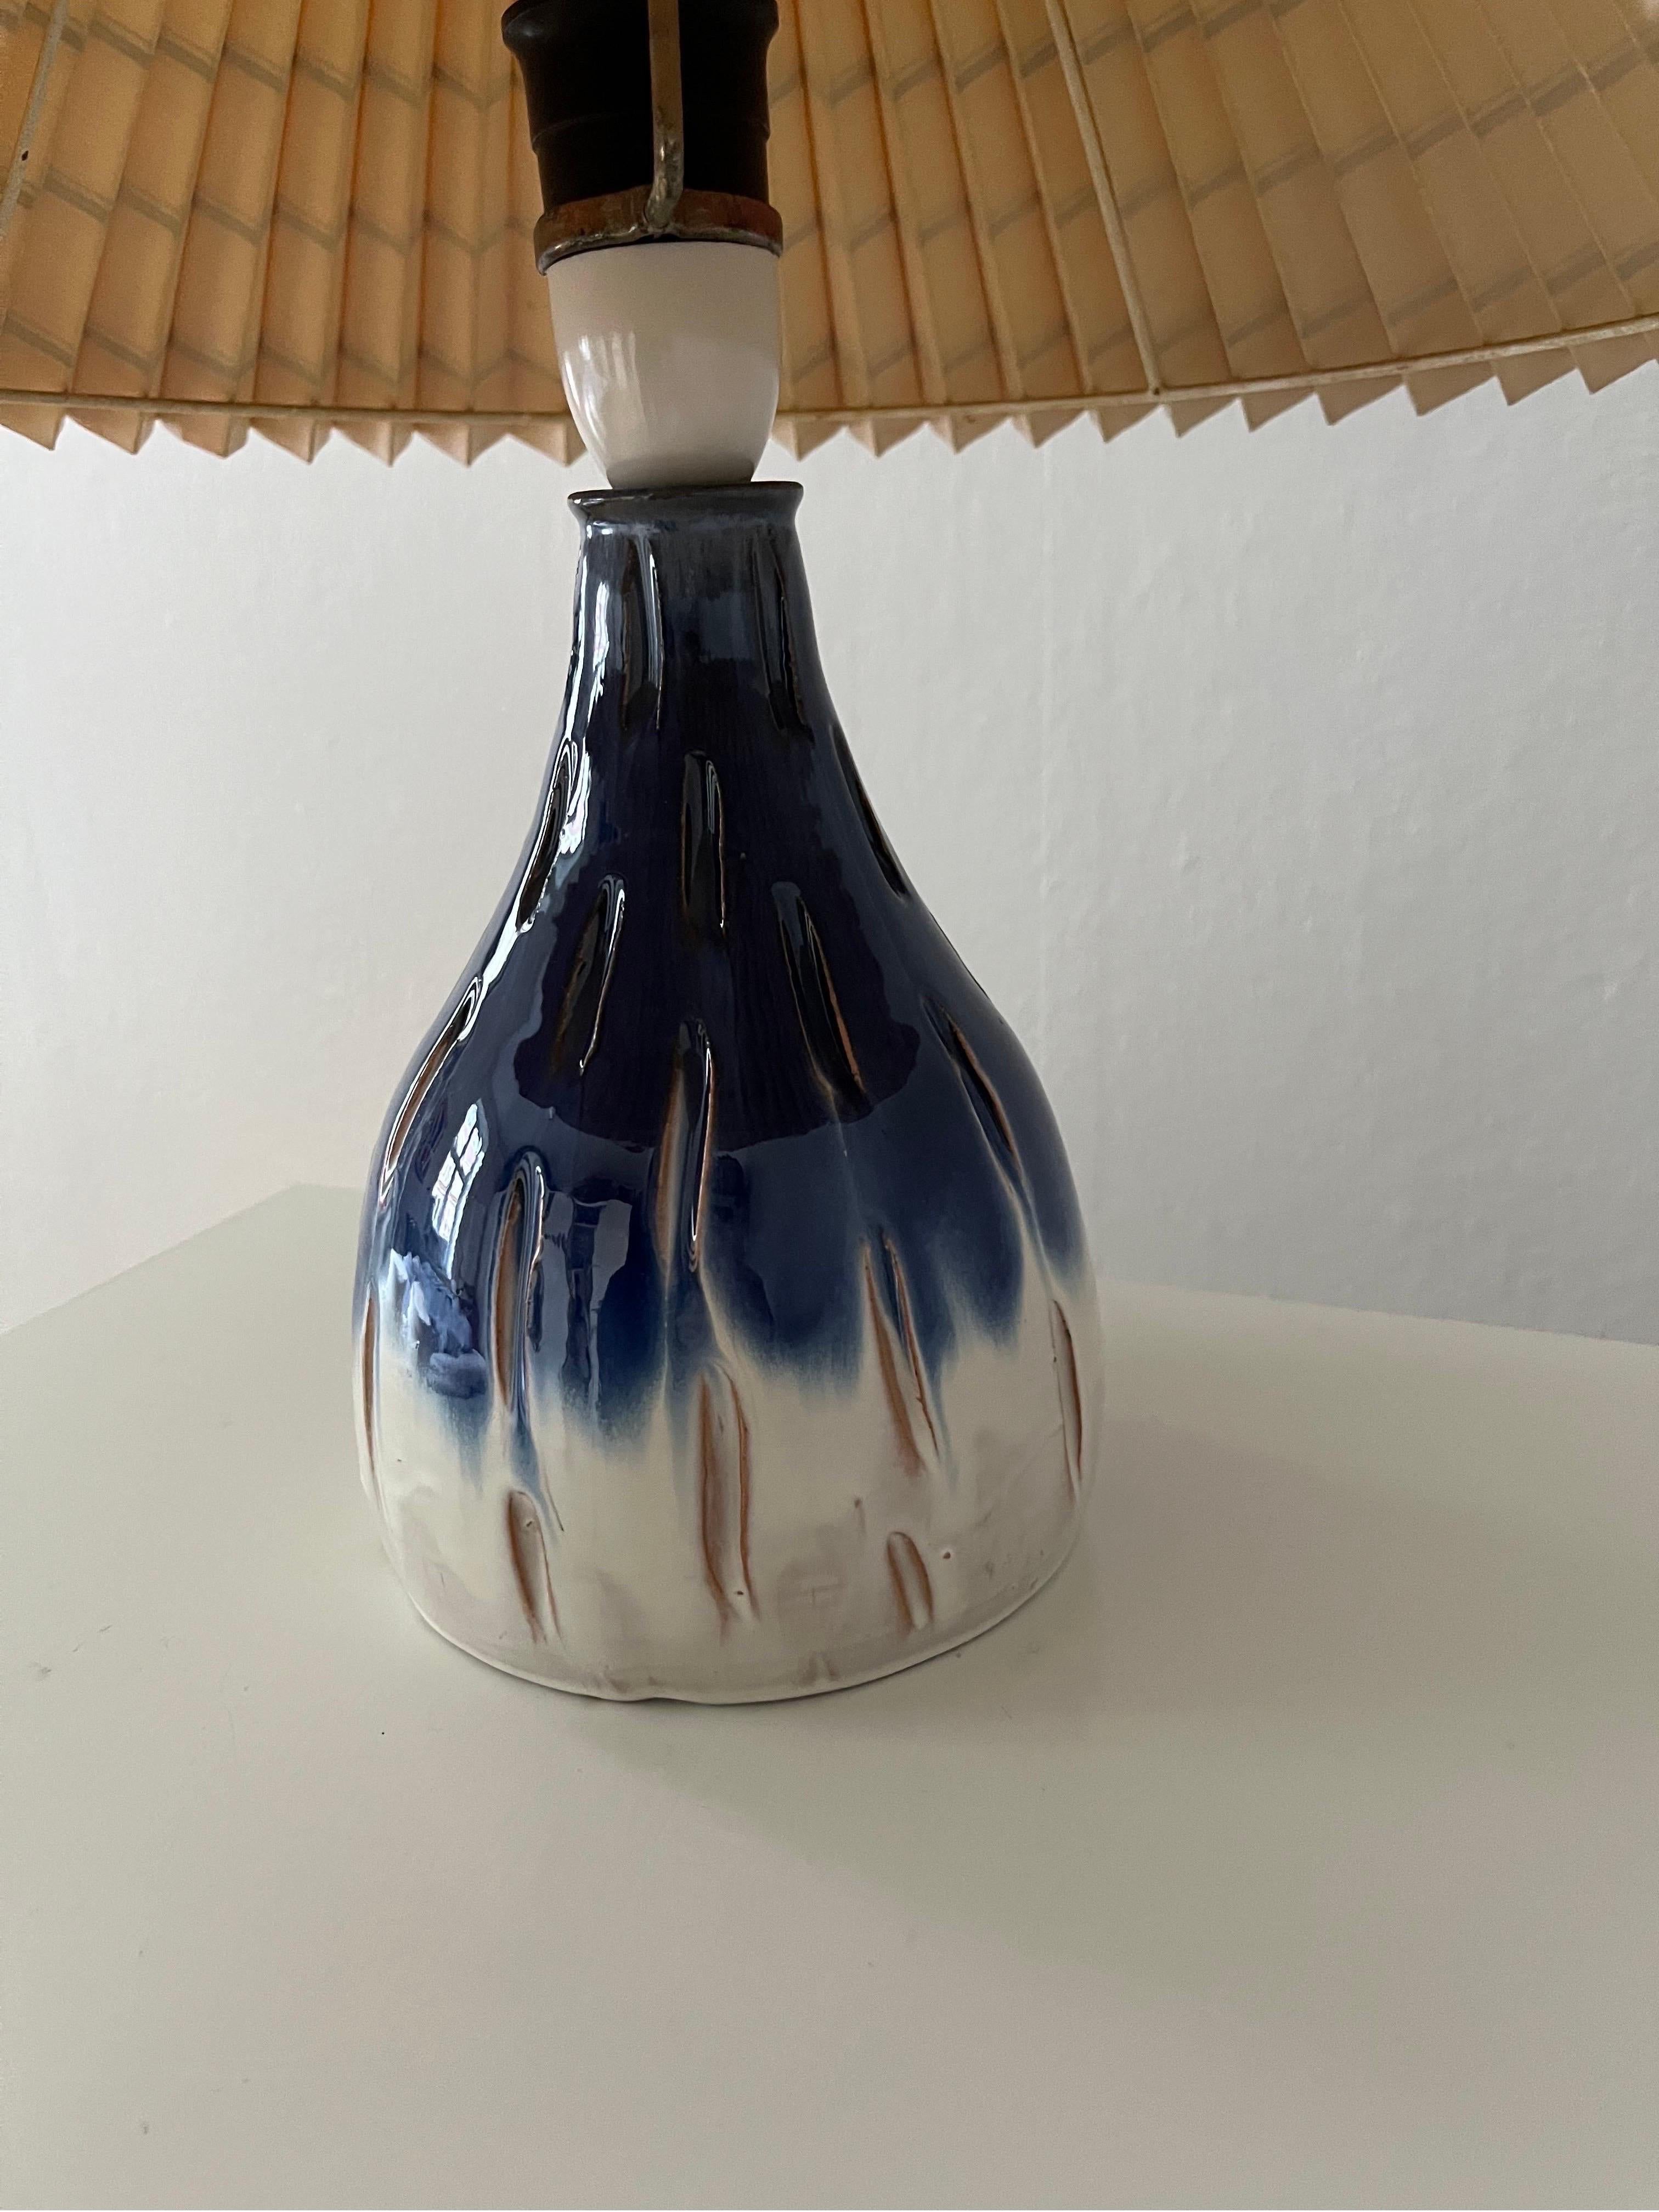 1960s Danish Ceramics Table Lamp by Krogslund Keramik with a gradient glaze In Good Condition For Sale In Frederiksberg C, DK